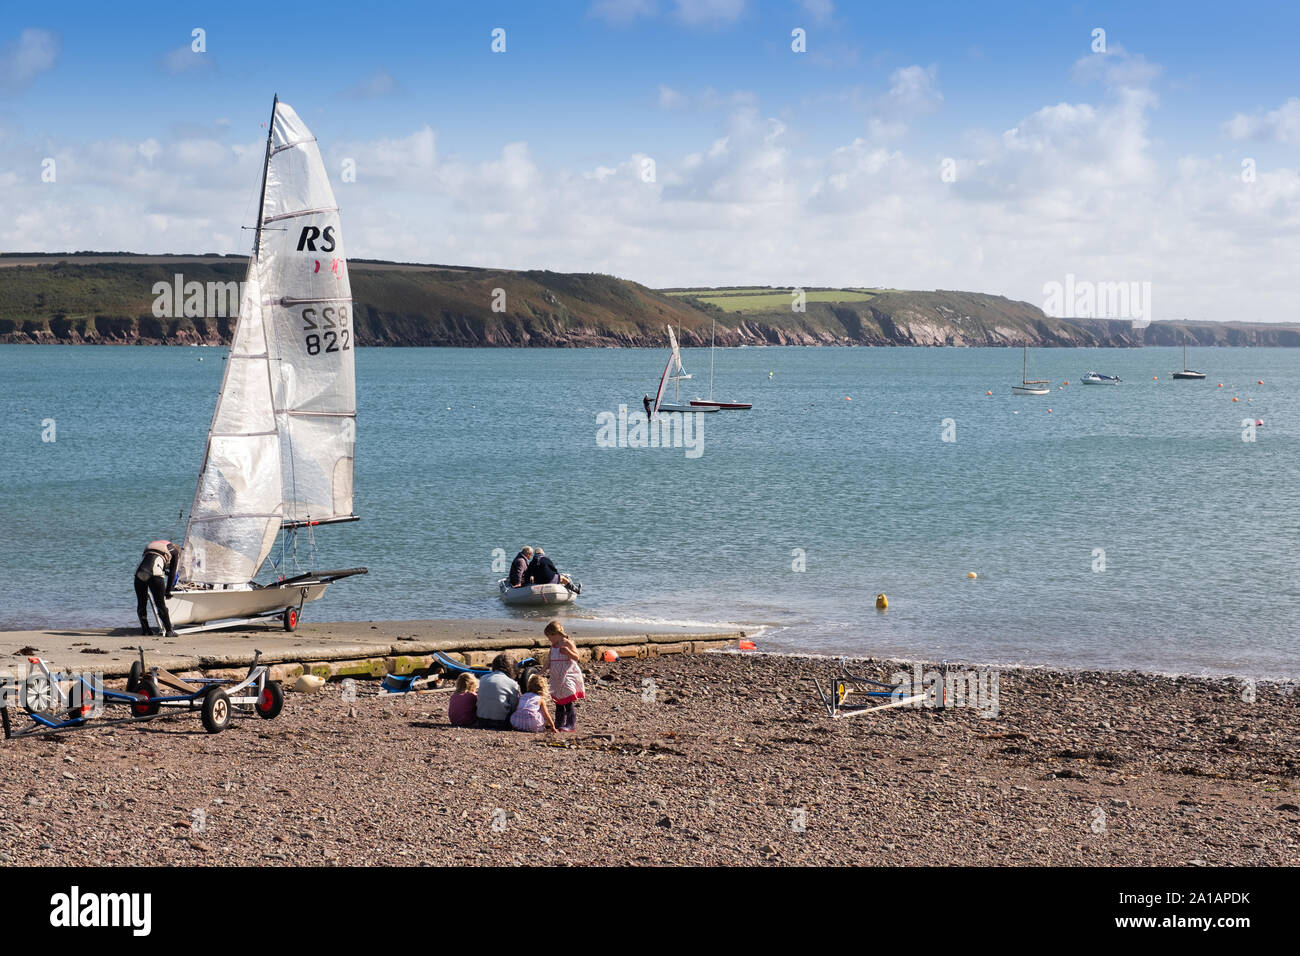 Small racing yachts at Dale, Pembrokeshire, south west wales UK. Stock Photo